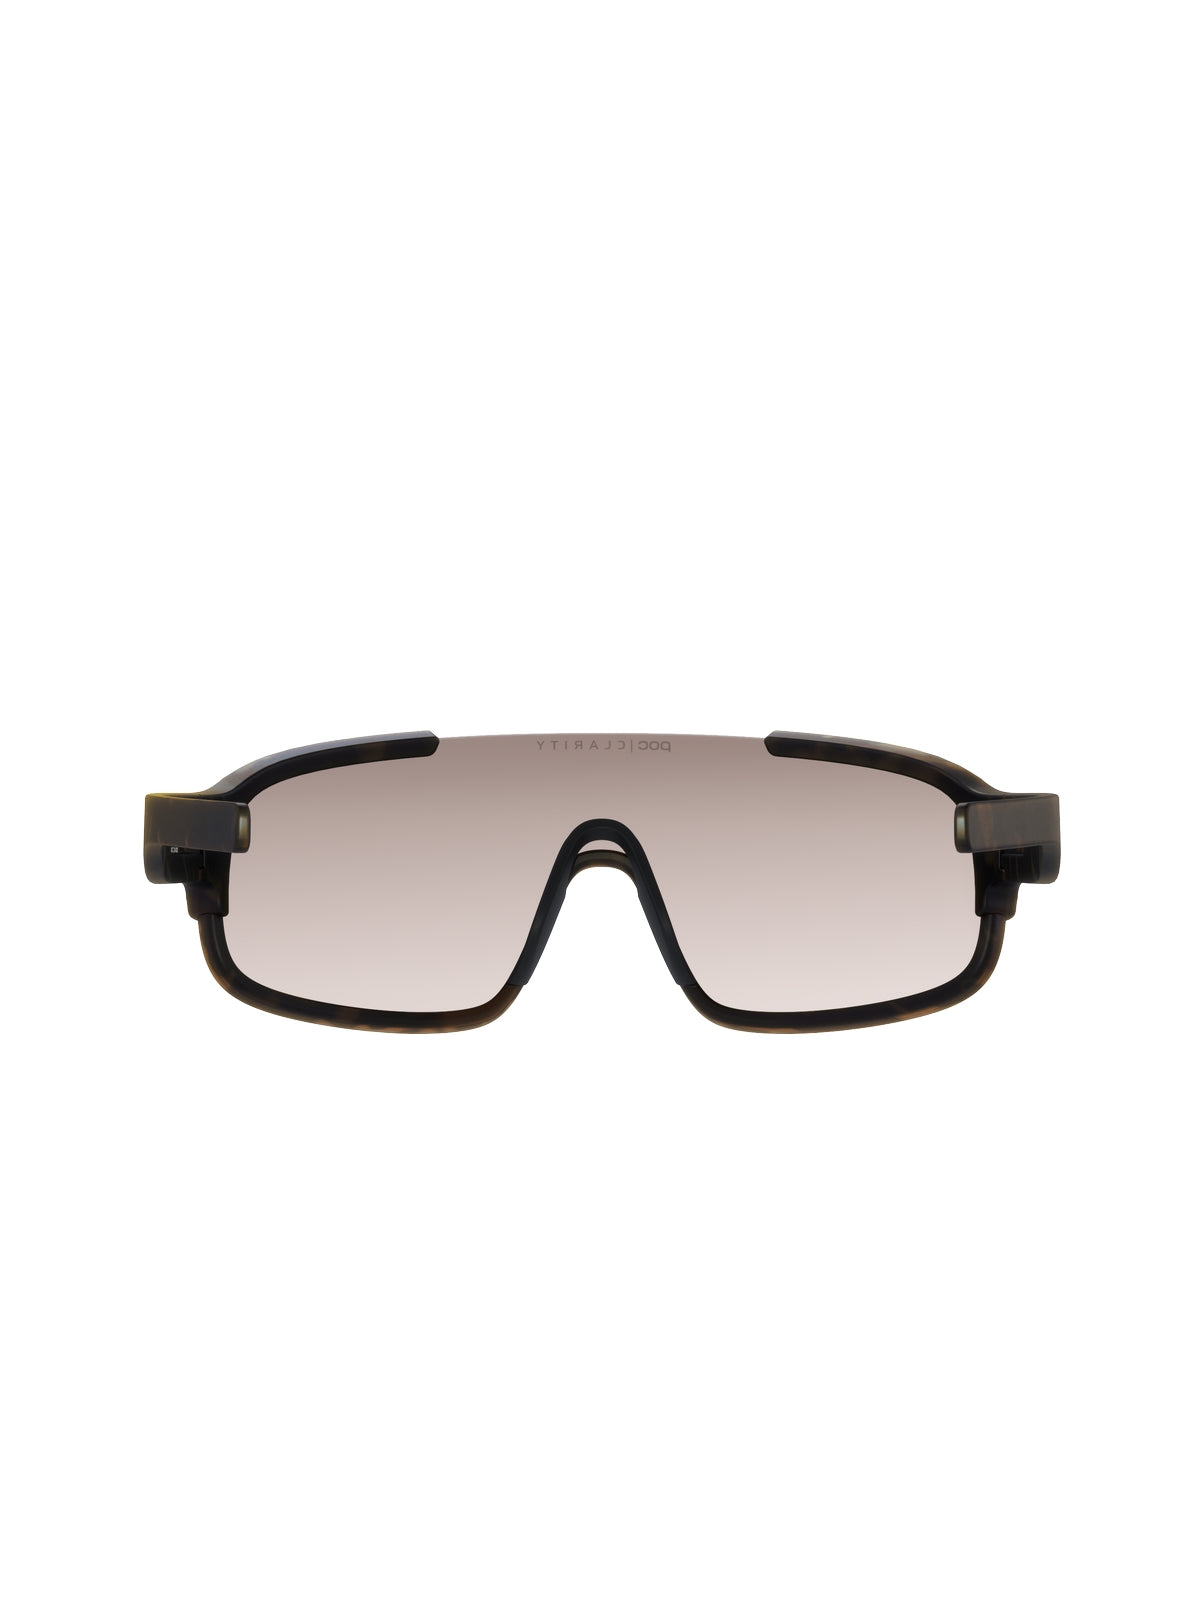 Okulary POC CRAVE - Tort. Brown - Clarity Trail.Brown/Silver Mirror Cat 2